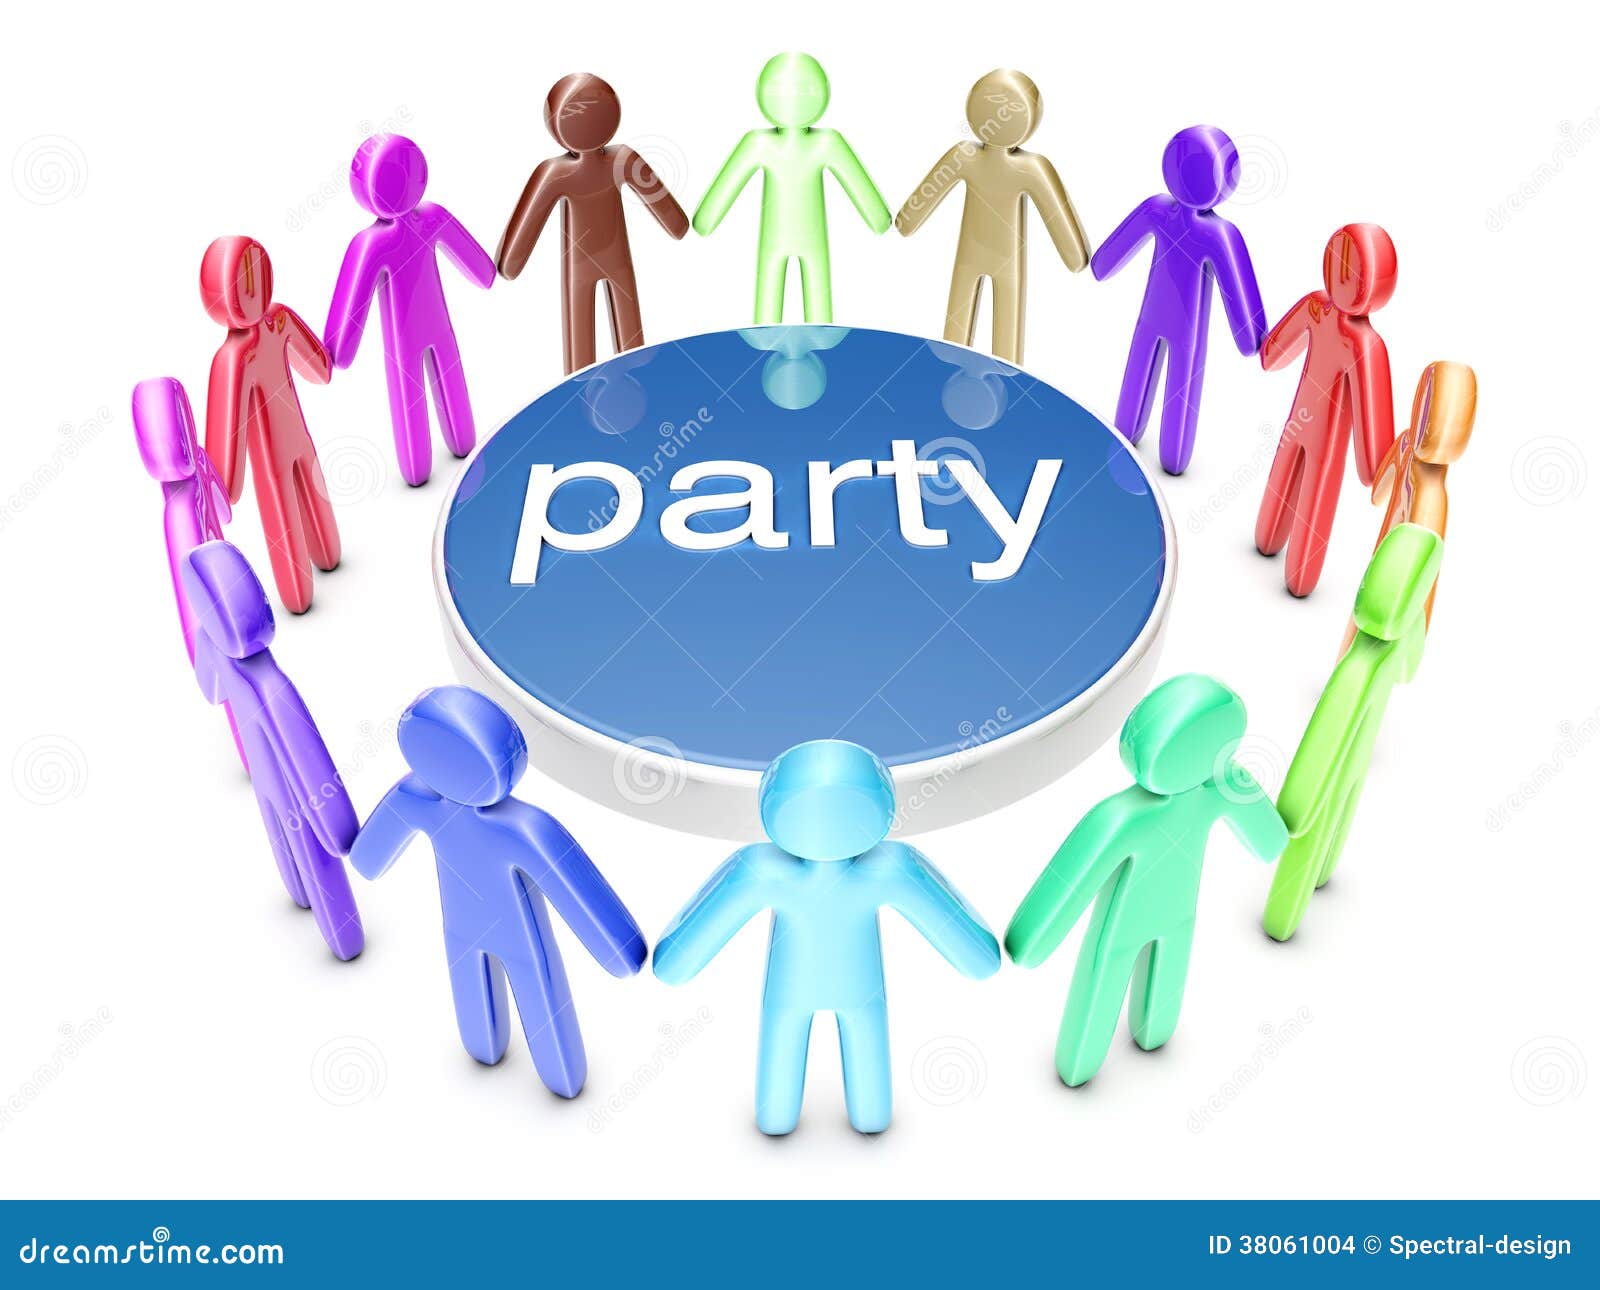 Party People stock illustration. Illustration of clipart - 38061004